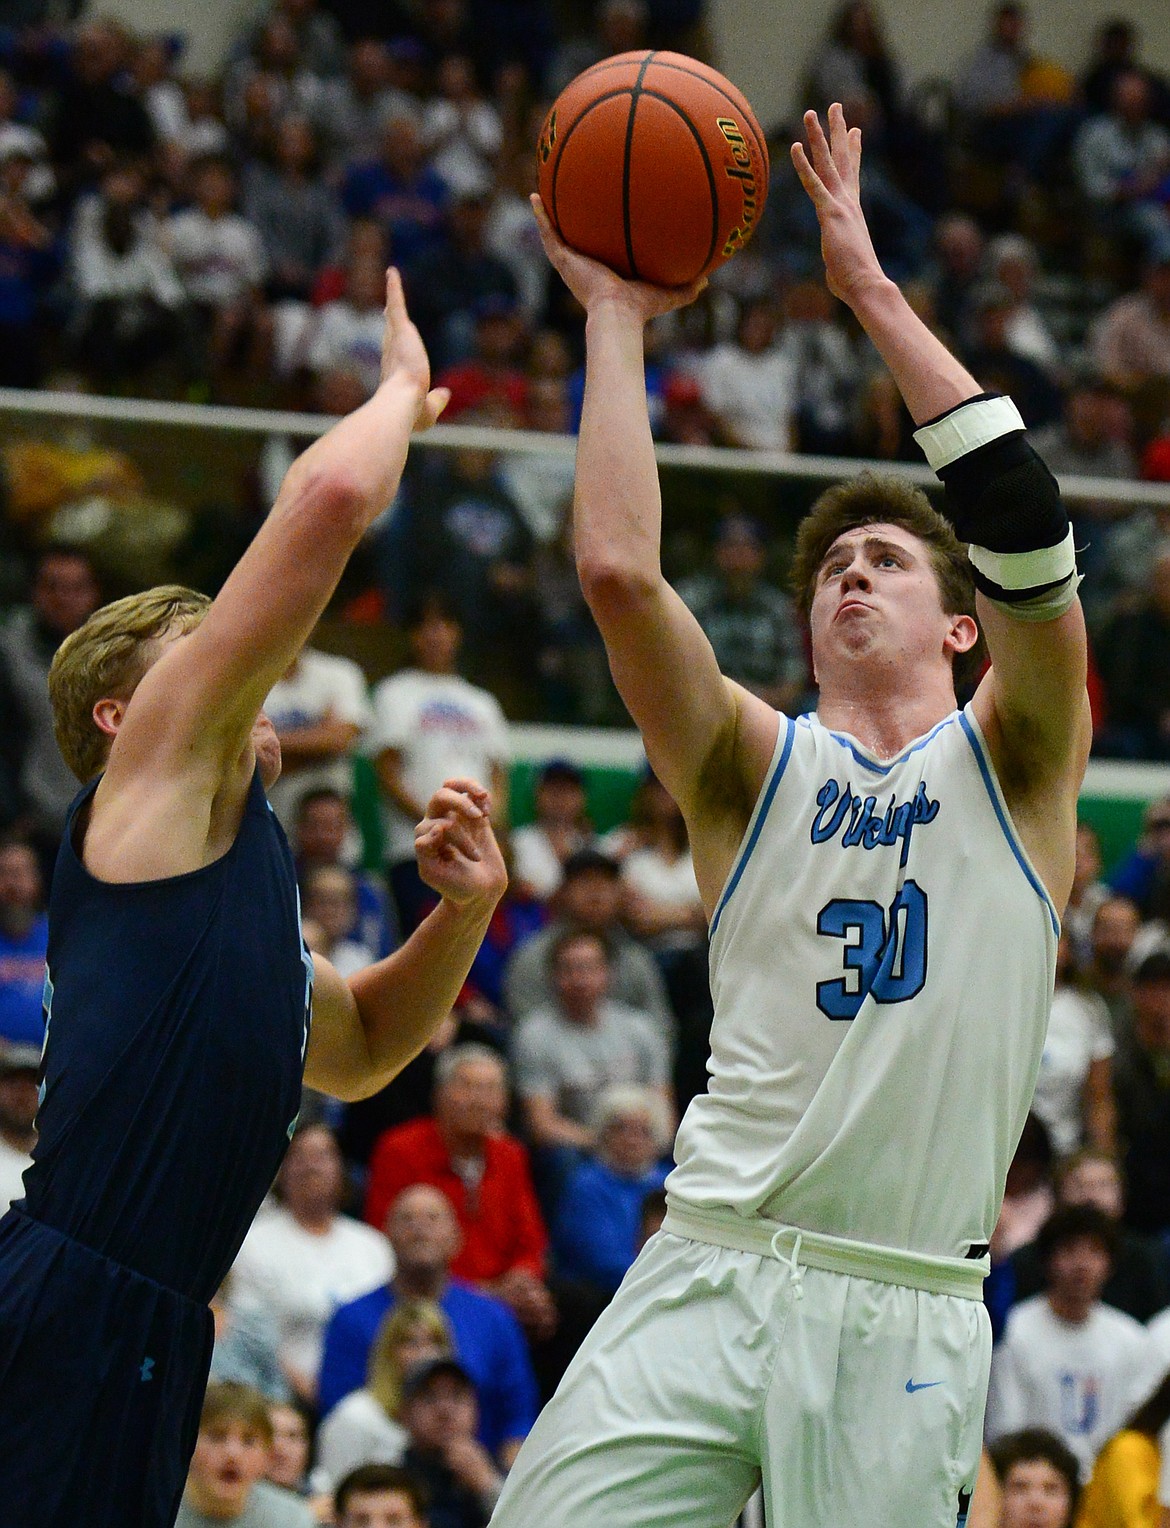 Bigfork's Logan Gilliard (30) drives to the hoop against Loyola Sacred Heart's Ryan Tirrell (2)  in the State Class B boys' basketball championship at the Belgrade Special Events Center in Belgrade on Friday. (Casey Kreider/Daily Inter Lake)